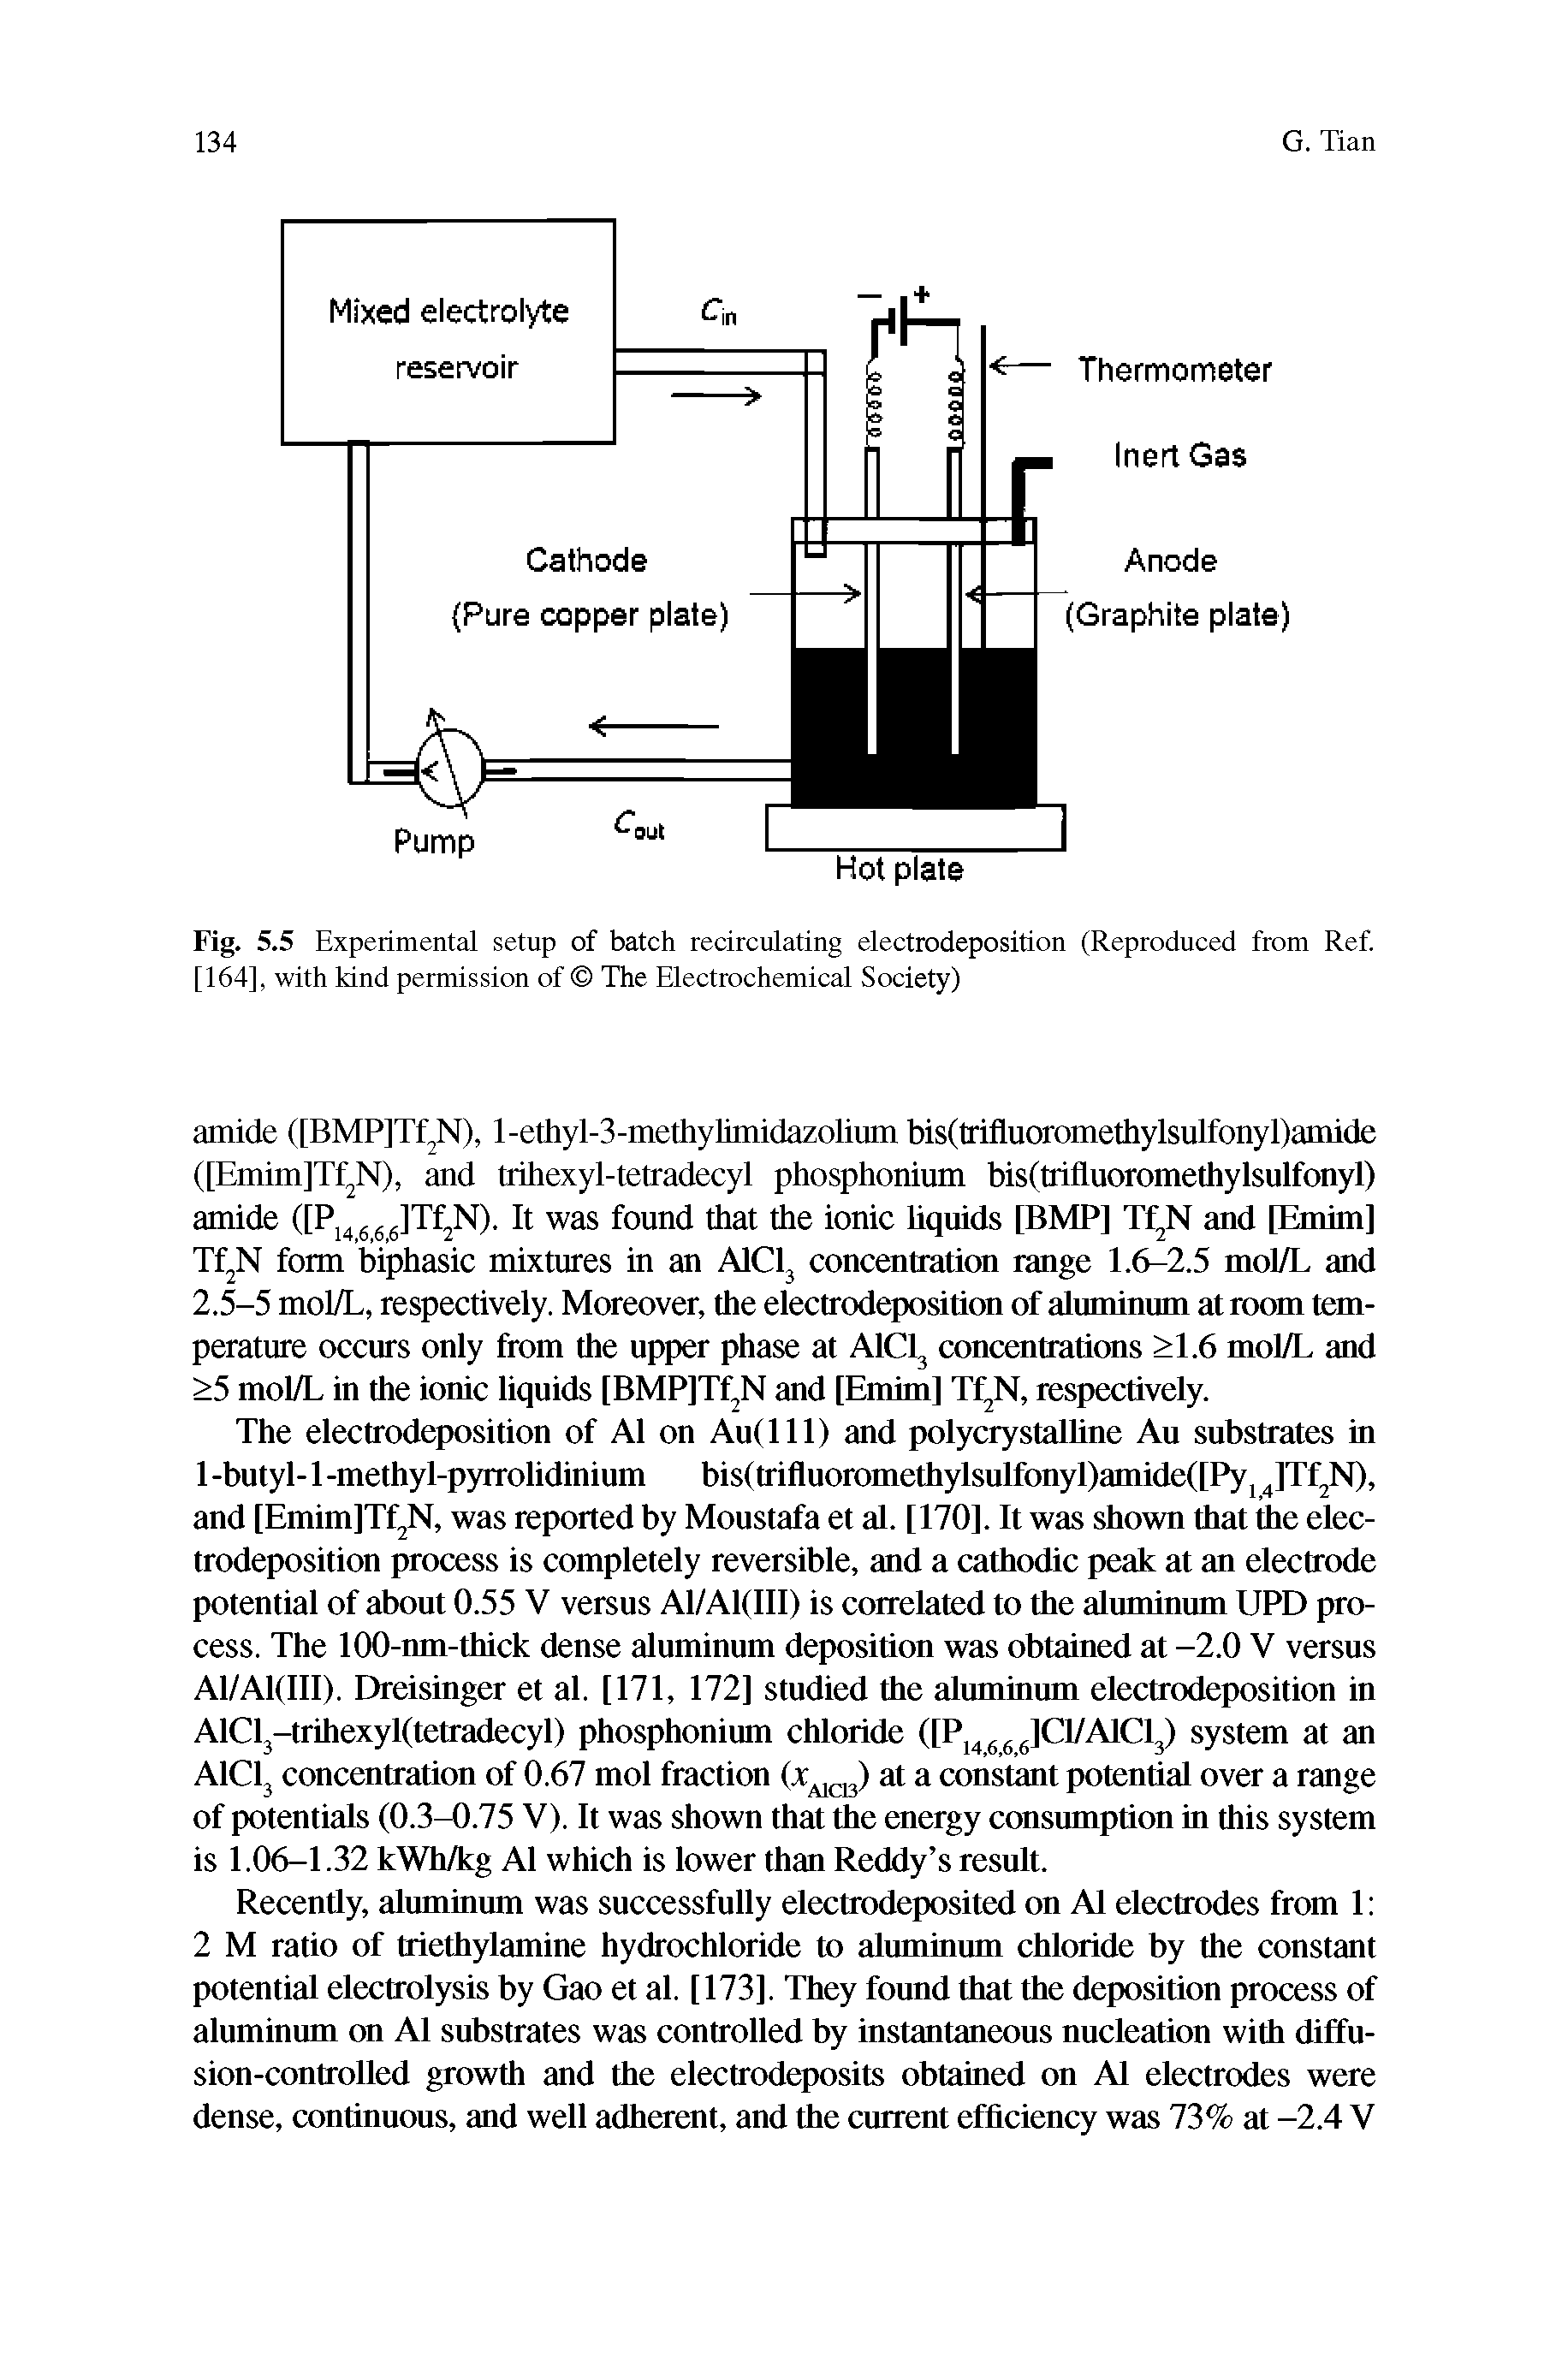 Fig. 5.5 Experimental setup of batch recirculating electrodeposition (Reproduced from Ref. [164], with kind permission of The Electrochemical Society)...